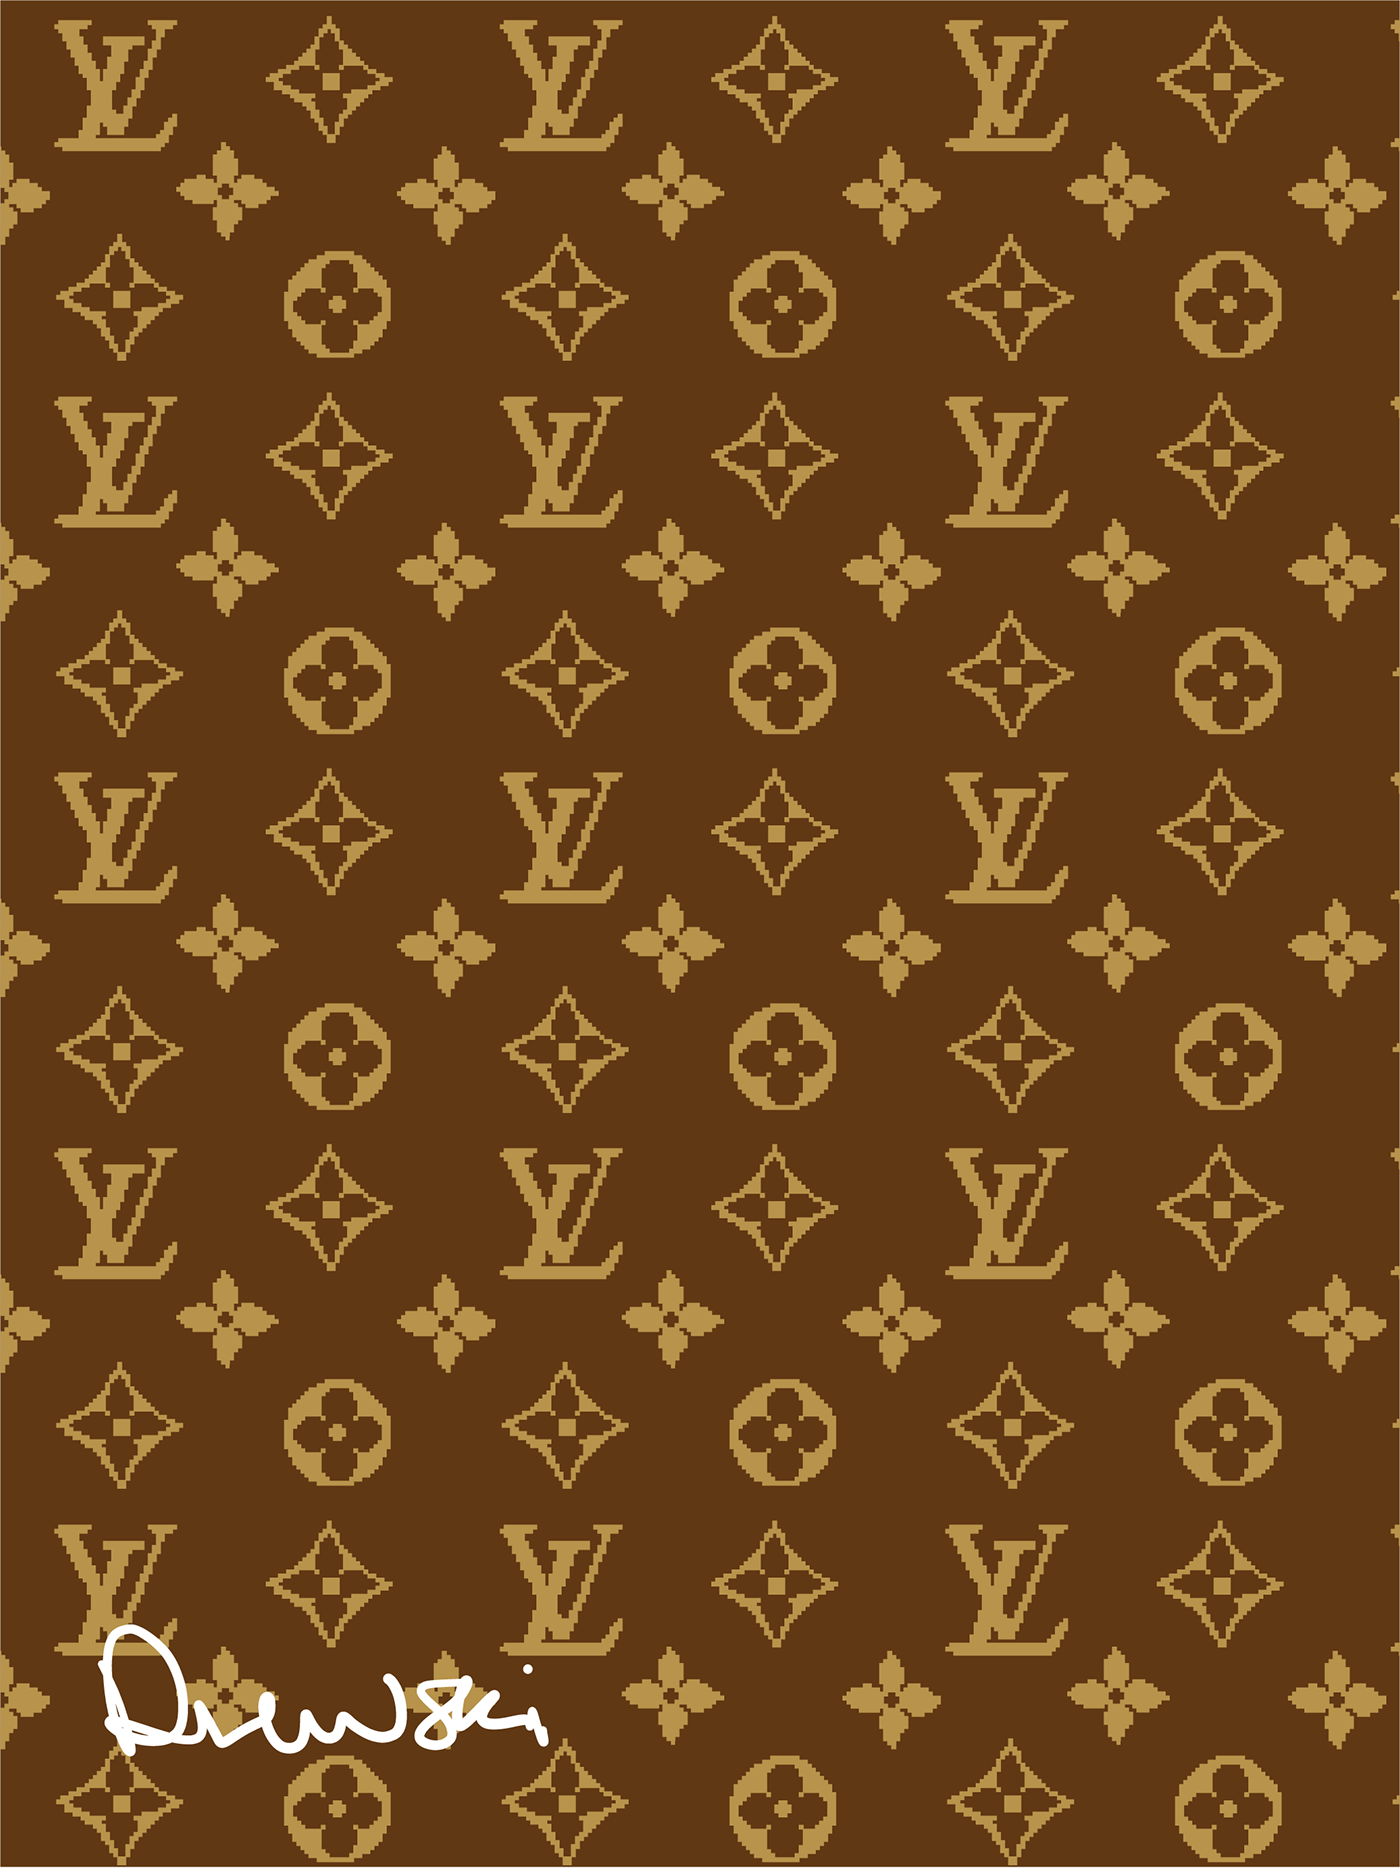 Download Pattern  Bolsa Louis Vuitton Colorida PNG Image with No  Background  PNGkeycom